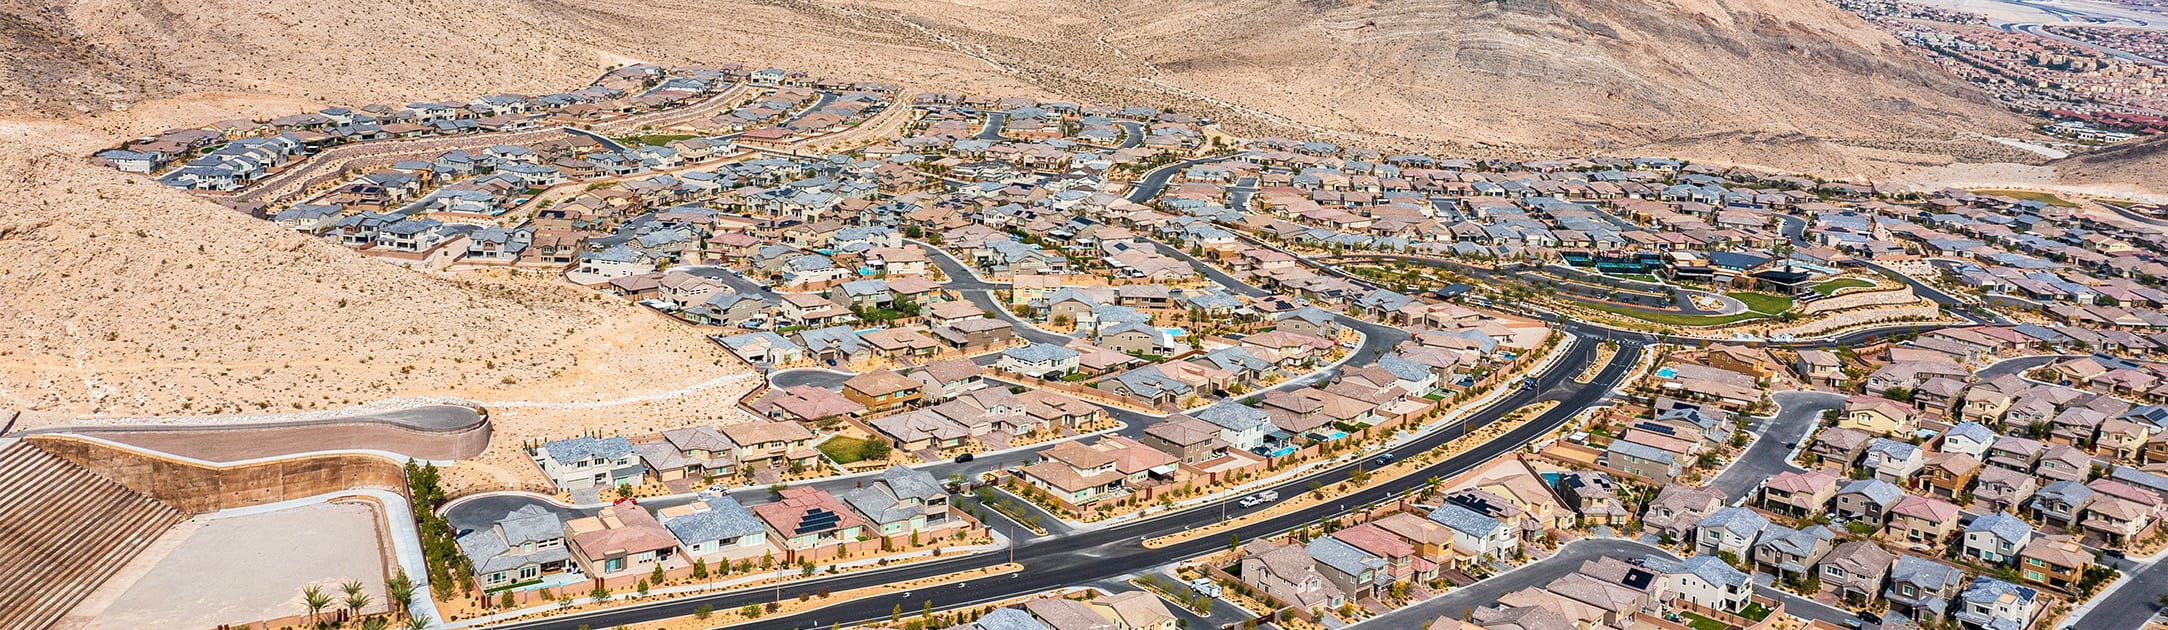 Aerial view of neighborhood with desert and mountains surrounding it.